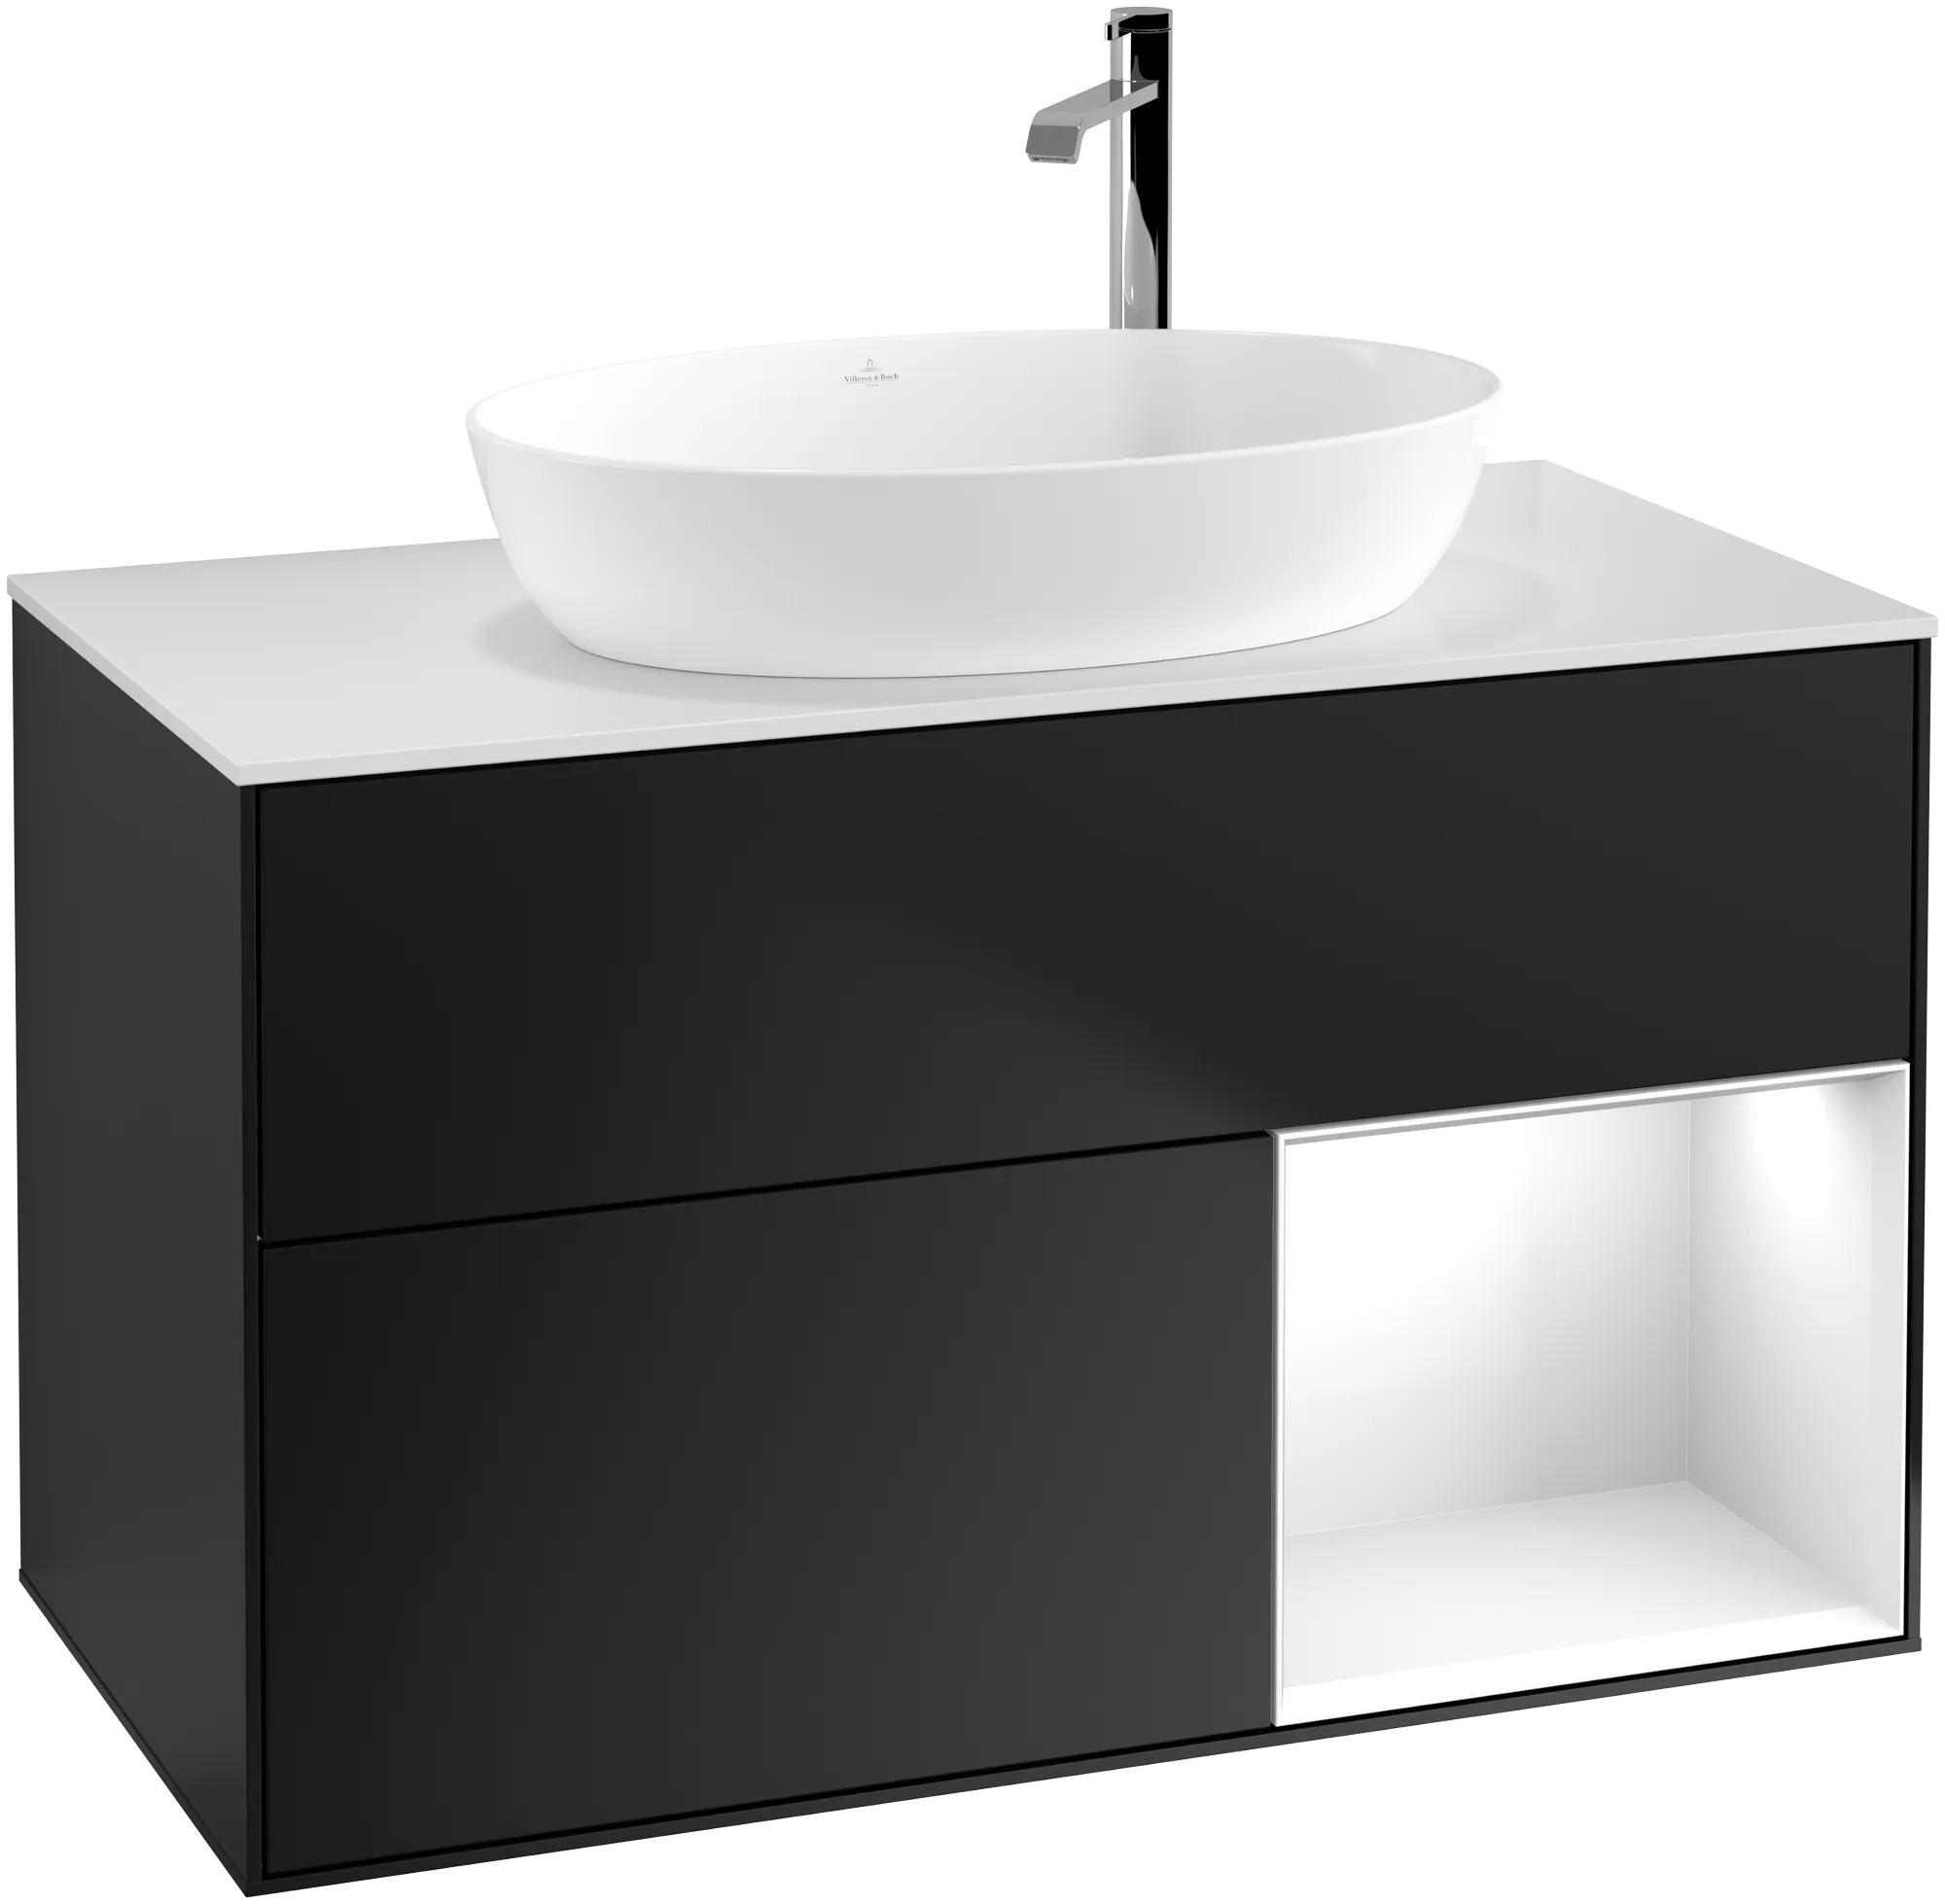 Picture of VILLEROY BOCH Finion Vanity unit, with lighting, 2 pull-out compartments, 1000 x 603 x 501 mm, Black Matt Lacquer / Glossy White Lacquer / Glass White Matt #G901GFPD